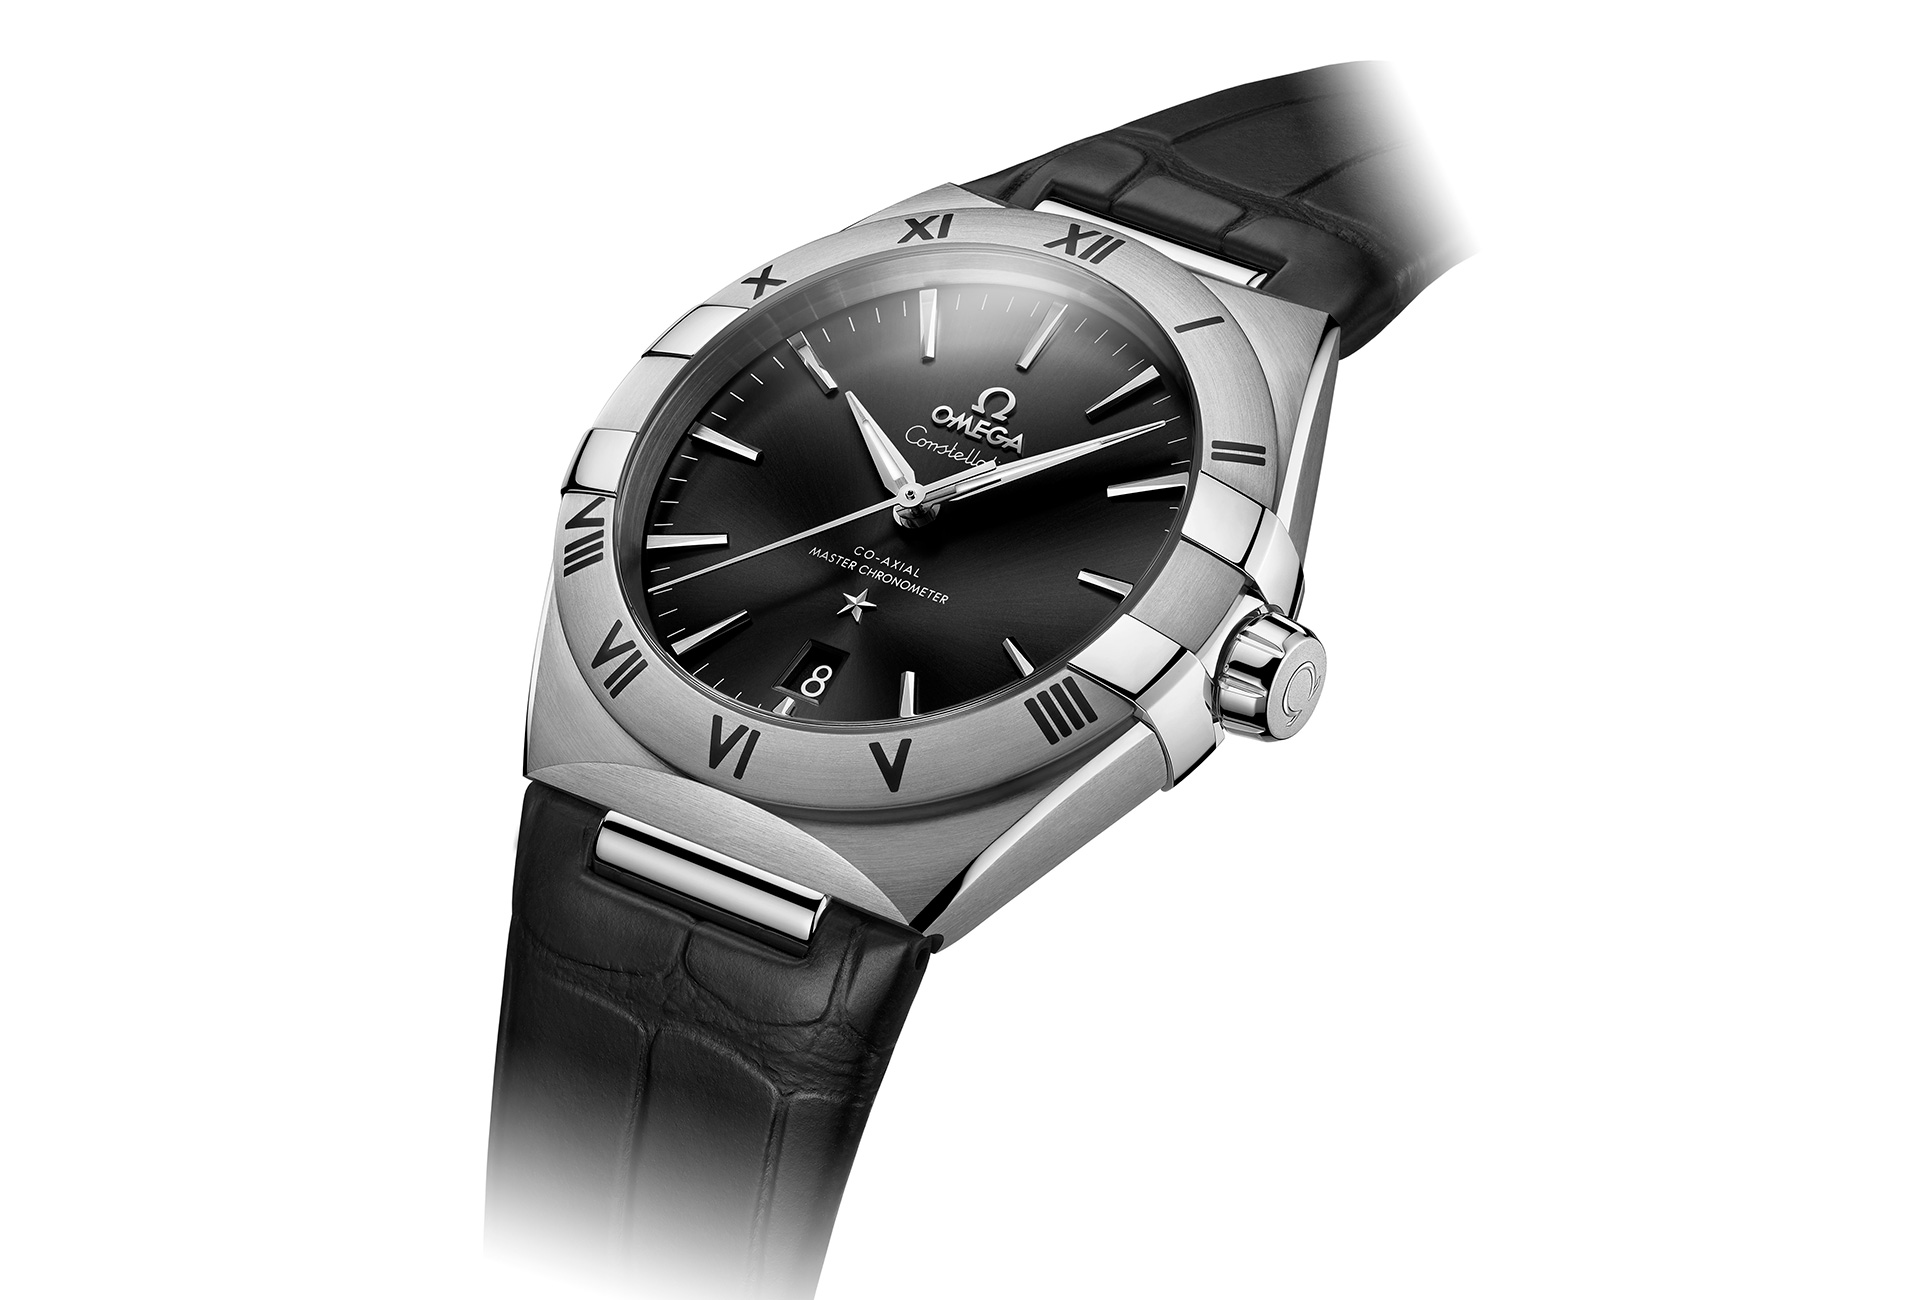 omega constellation leather strap